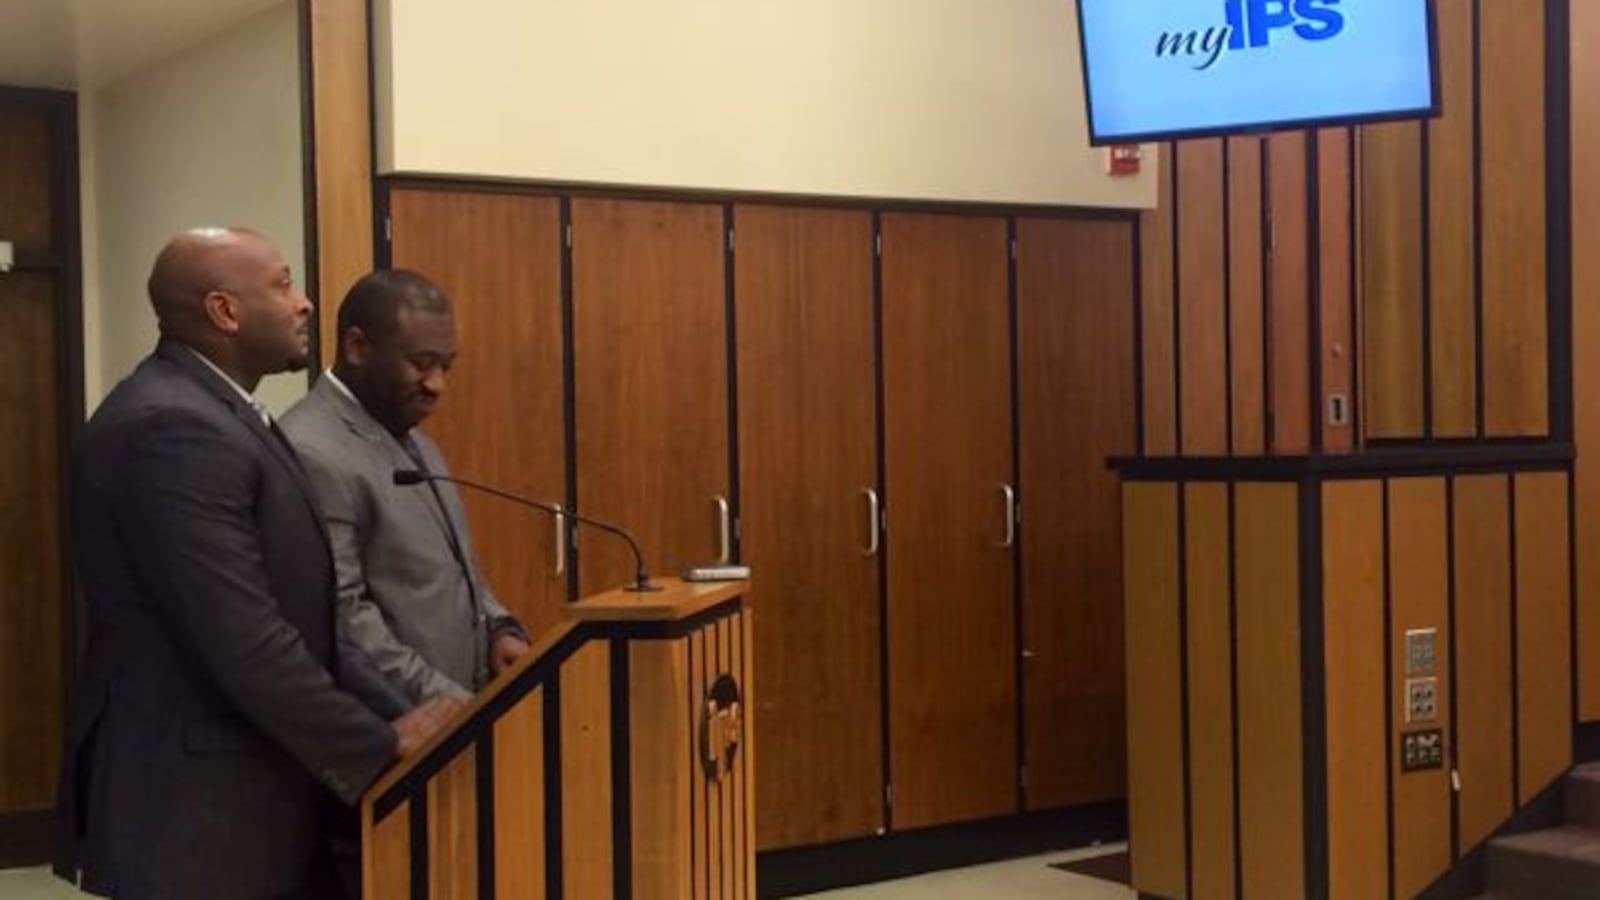 Earl Martin Phalen and Marlon Llewellyn of Phalen Leadership Academy present their idea to IPS school board members to open an autonomous school within the district.